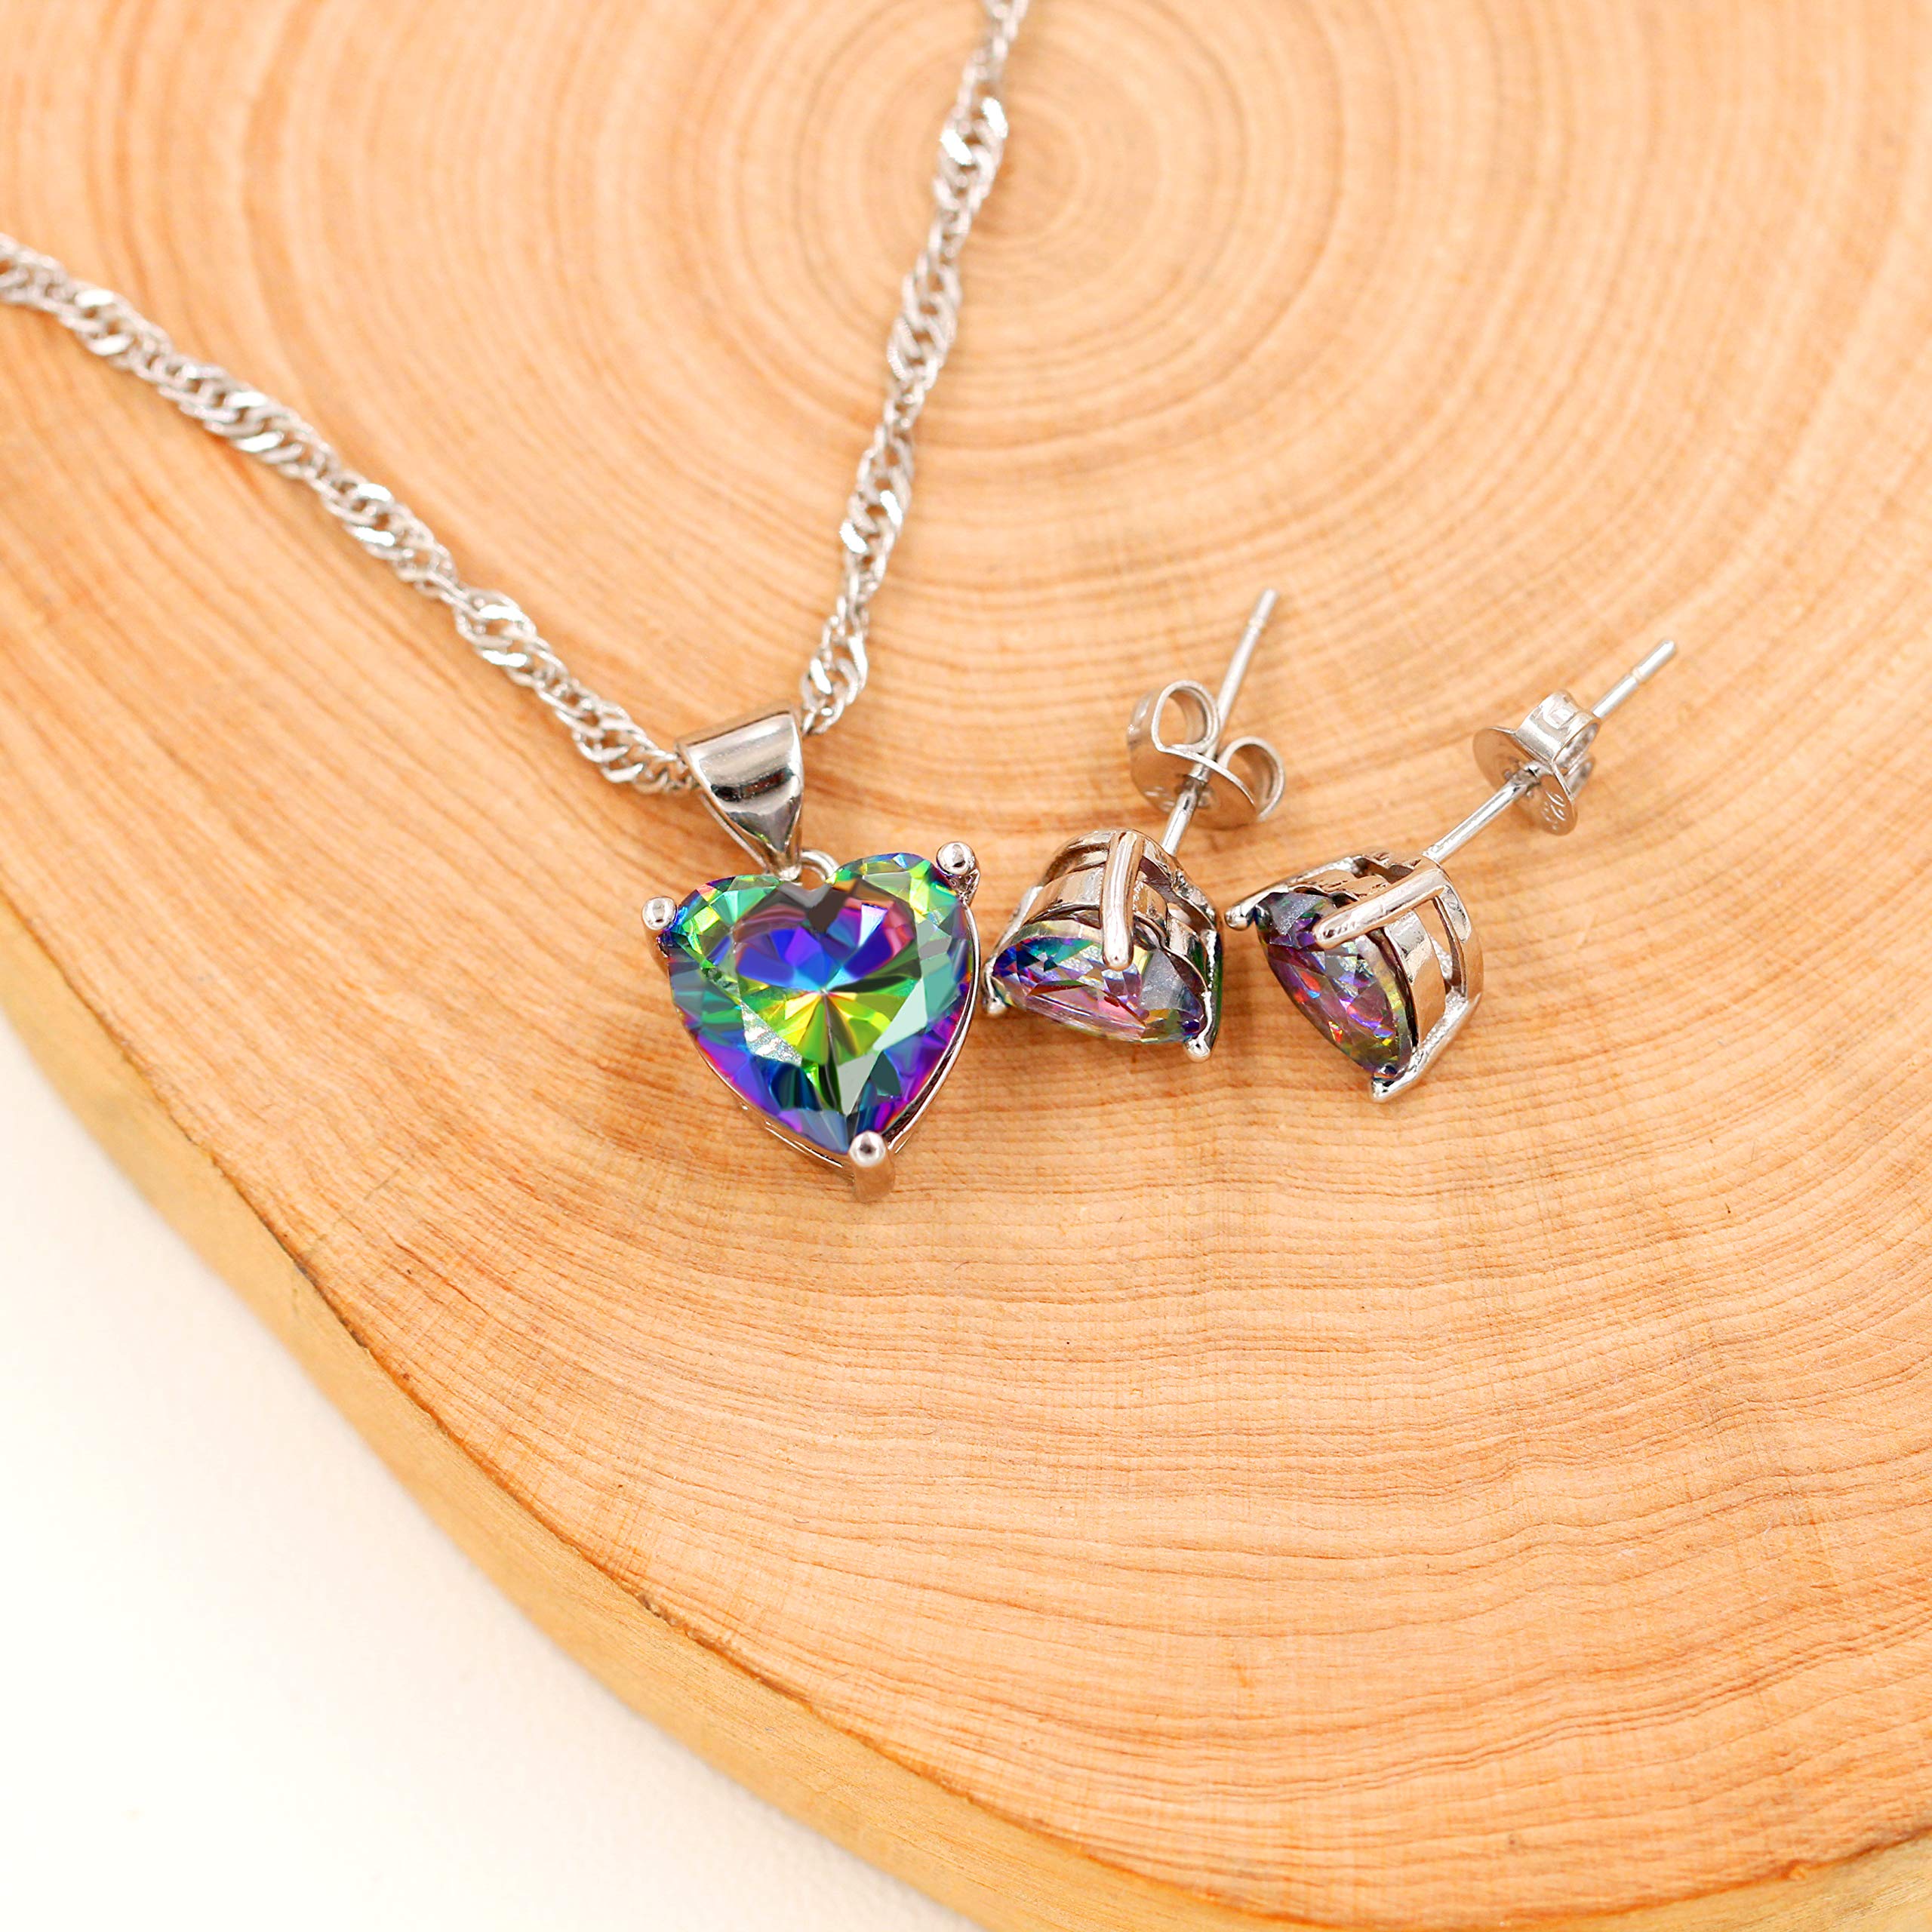 Uloveido 10mm Simulated Mystic Topaz Rainbow Heart Cubic Zirconia Solitaire Pendant Necklace Platinum Plated Y891